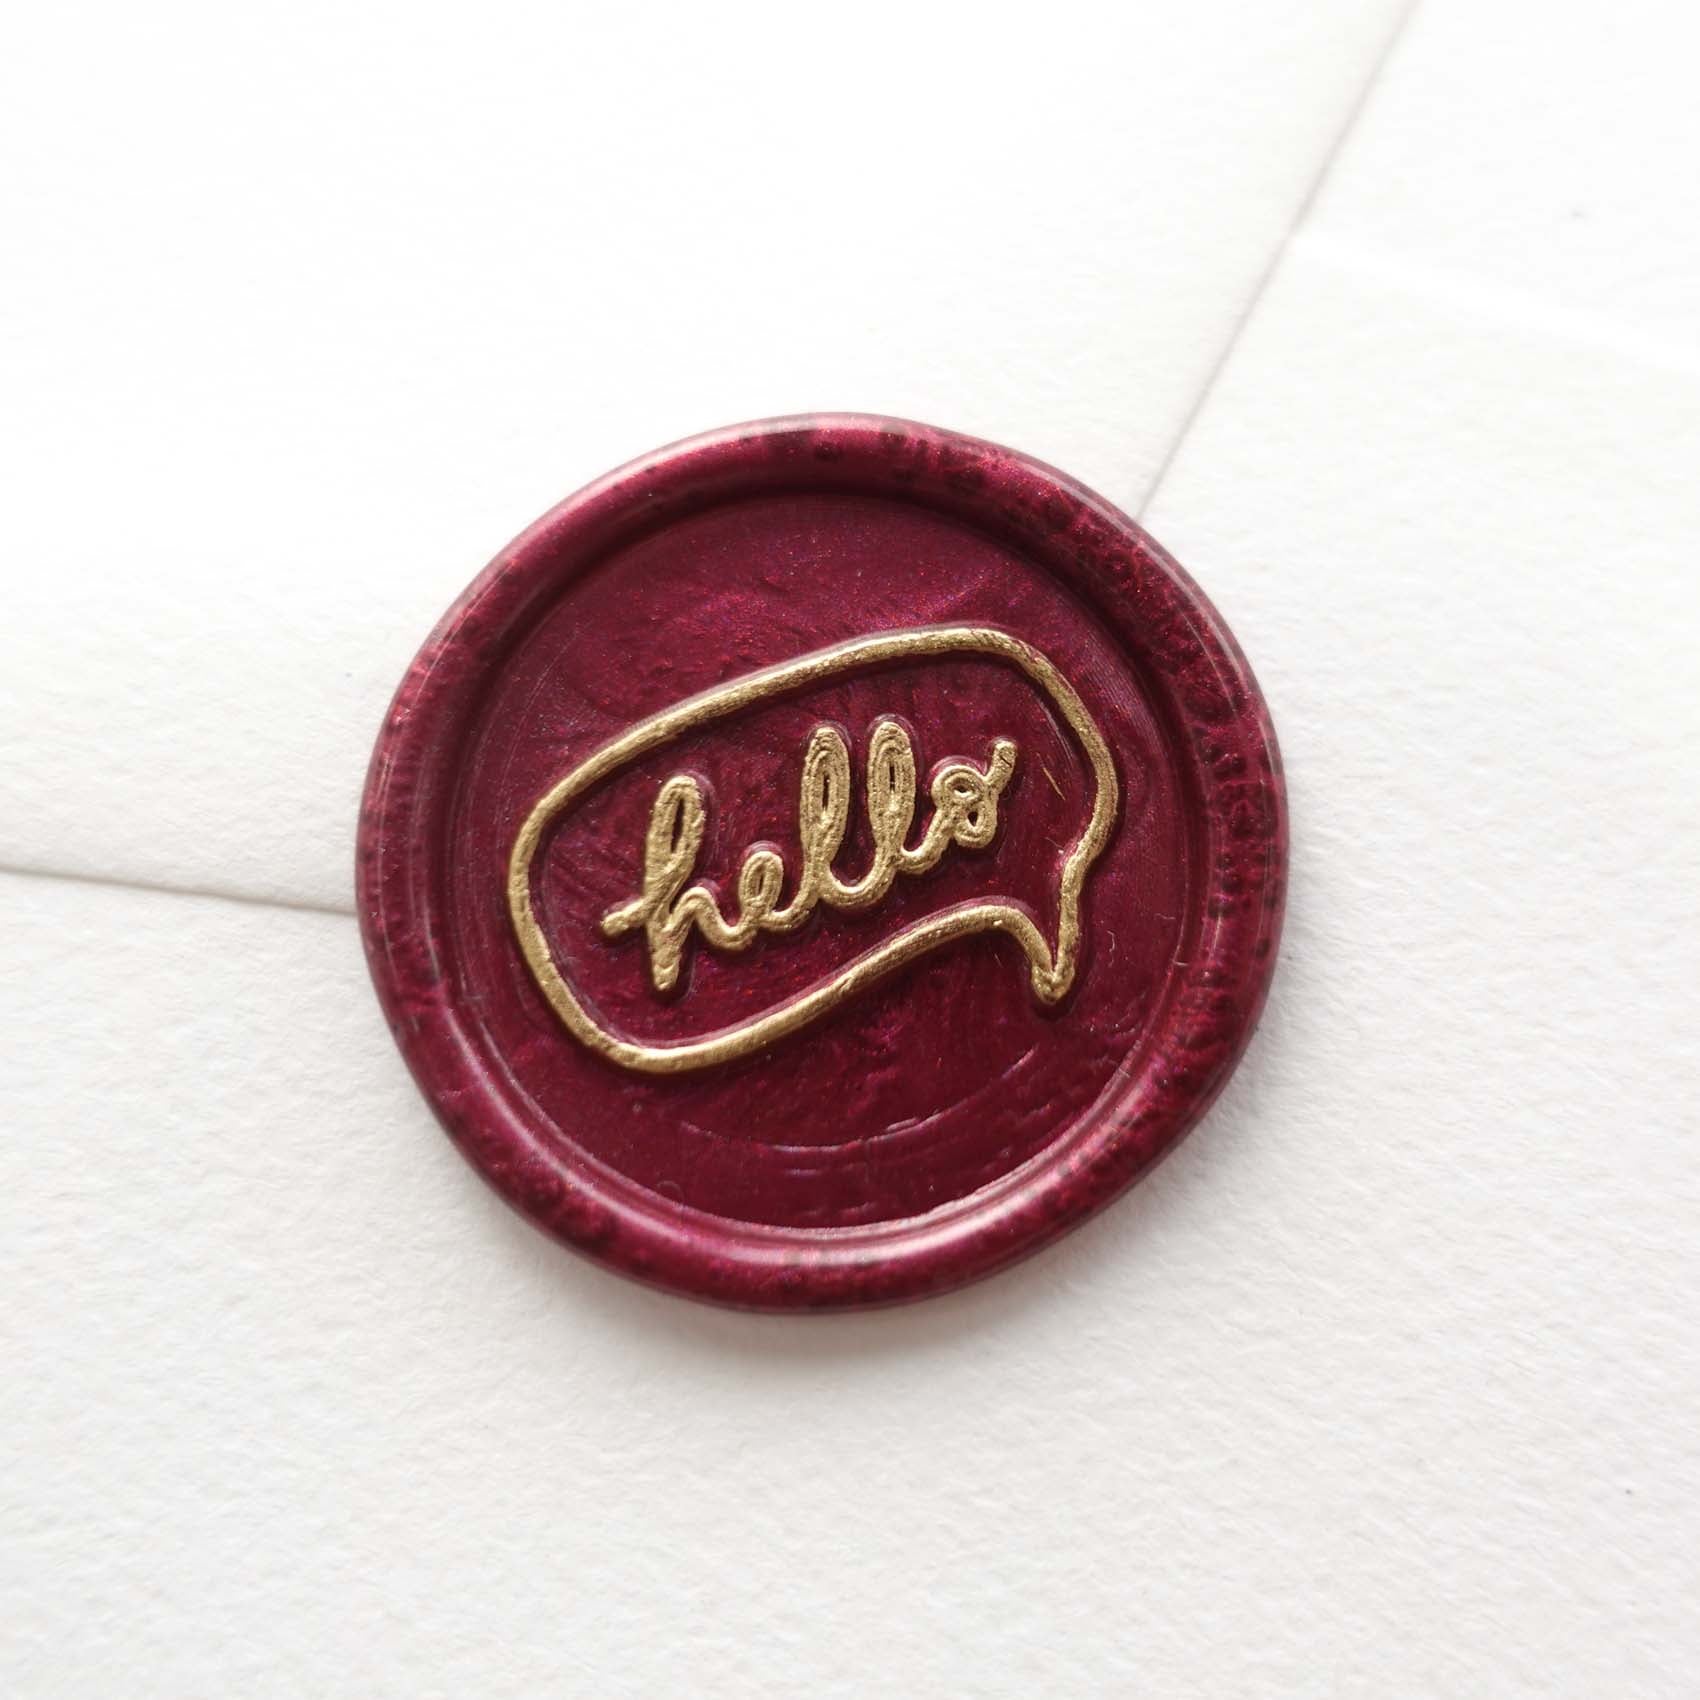 Hello Speech Bubble wax seal stamp, wax seal kit or stamp head